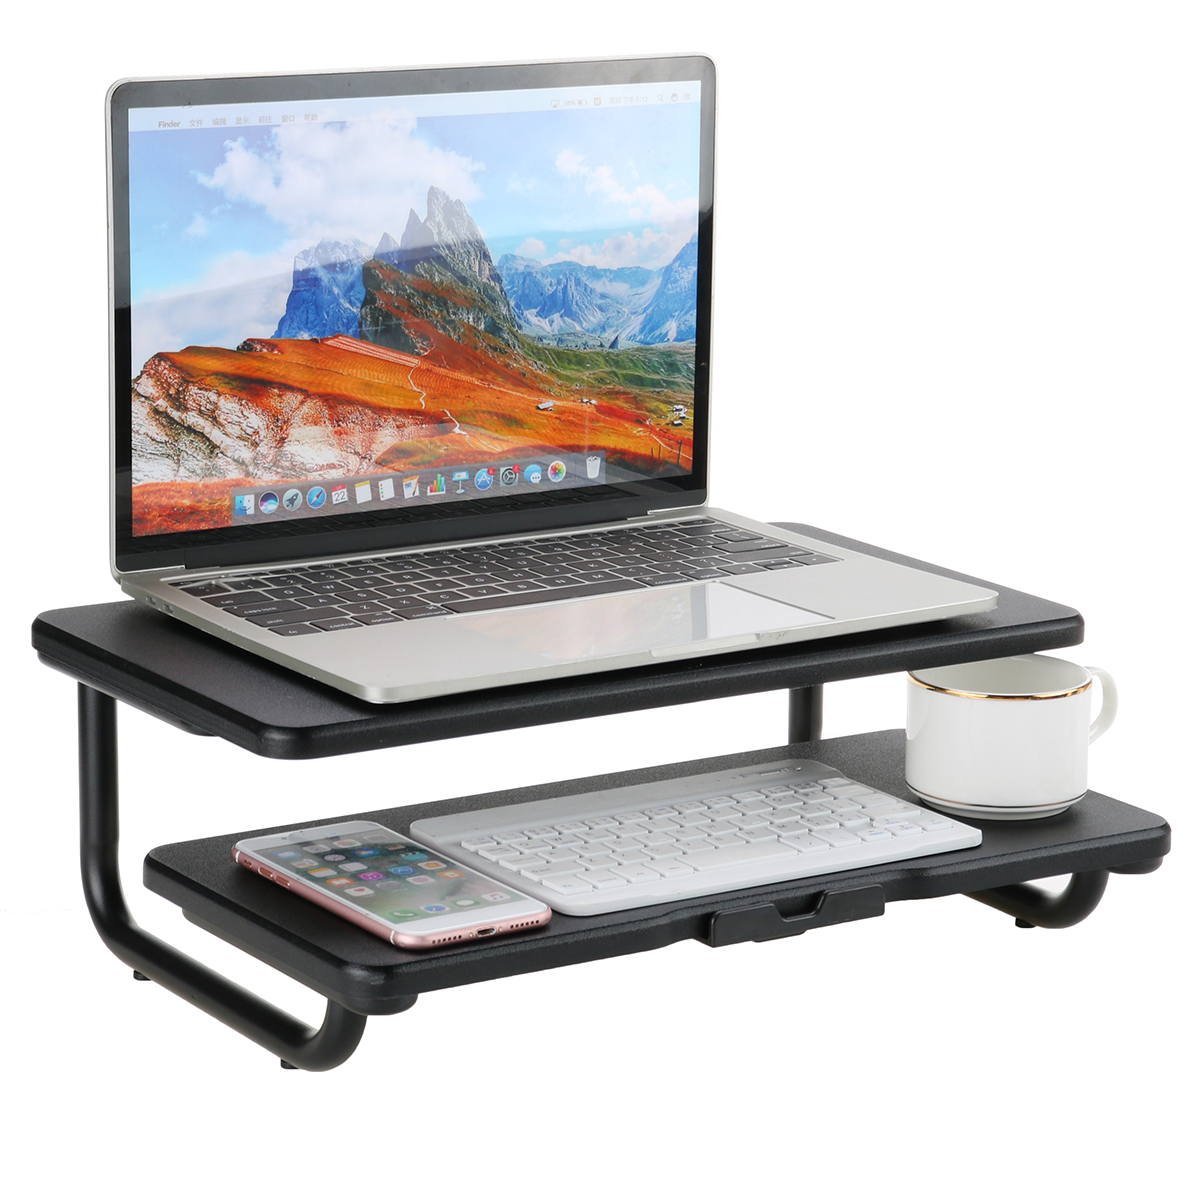 Find Multifunction Double Layer Monitor Riser Macbook Desktop Stand Organizer with Mobile Phone Holder for Sale on Gipsybee.com with cryptocurrencies